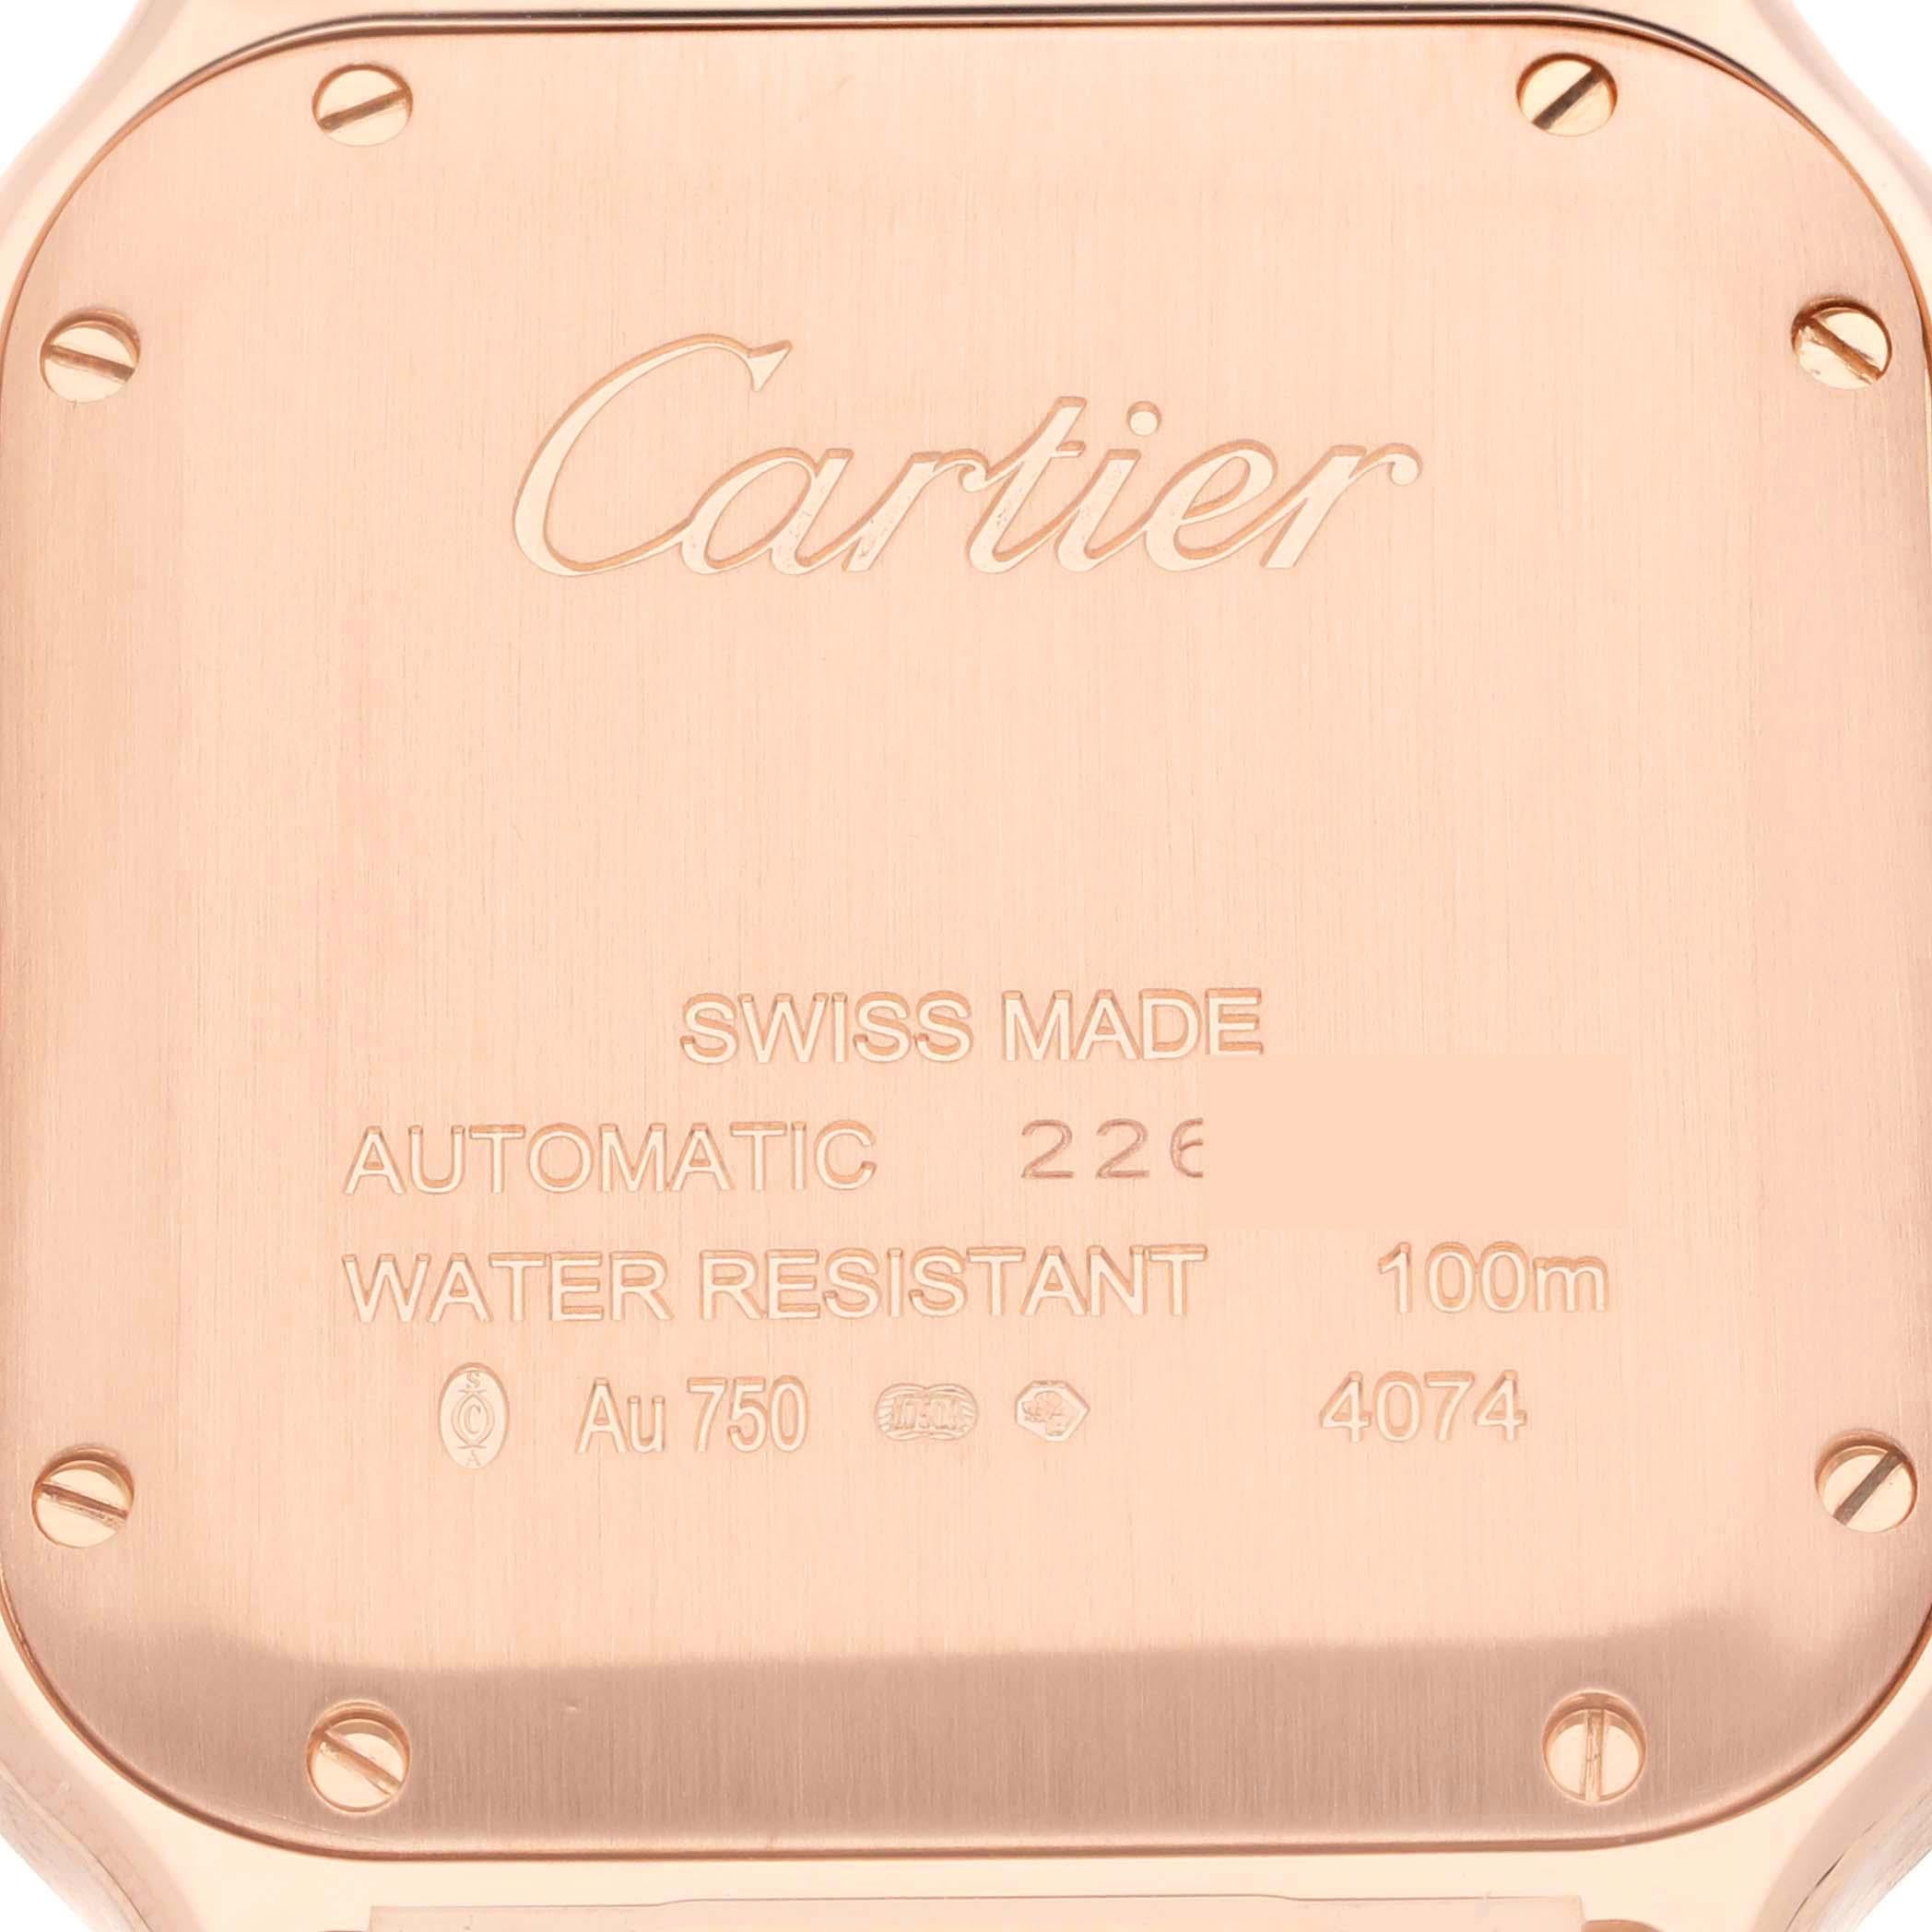 Cartier Santos Midsize Rose Gold Mens Watch WGSA0012 Box Card. Automatic self-winding movement caliber 1847 MC. 18K rose gold 35.1 x 35.1 mm case. Protected octagonal crown set with a blue faceted sapphire. 18K rose gold bezel punctuated with 8